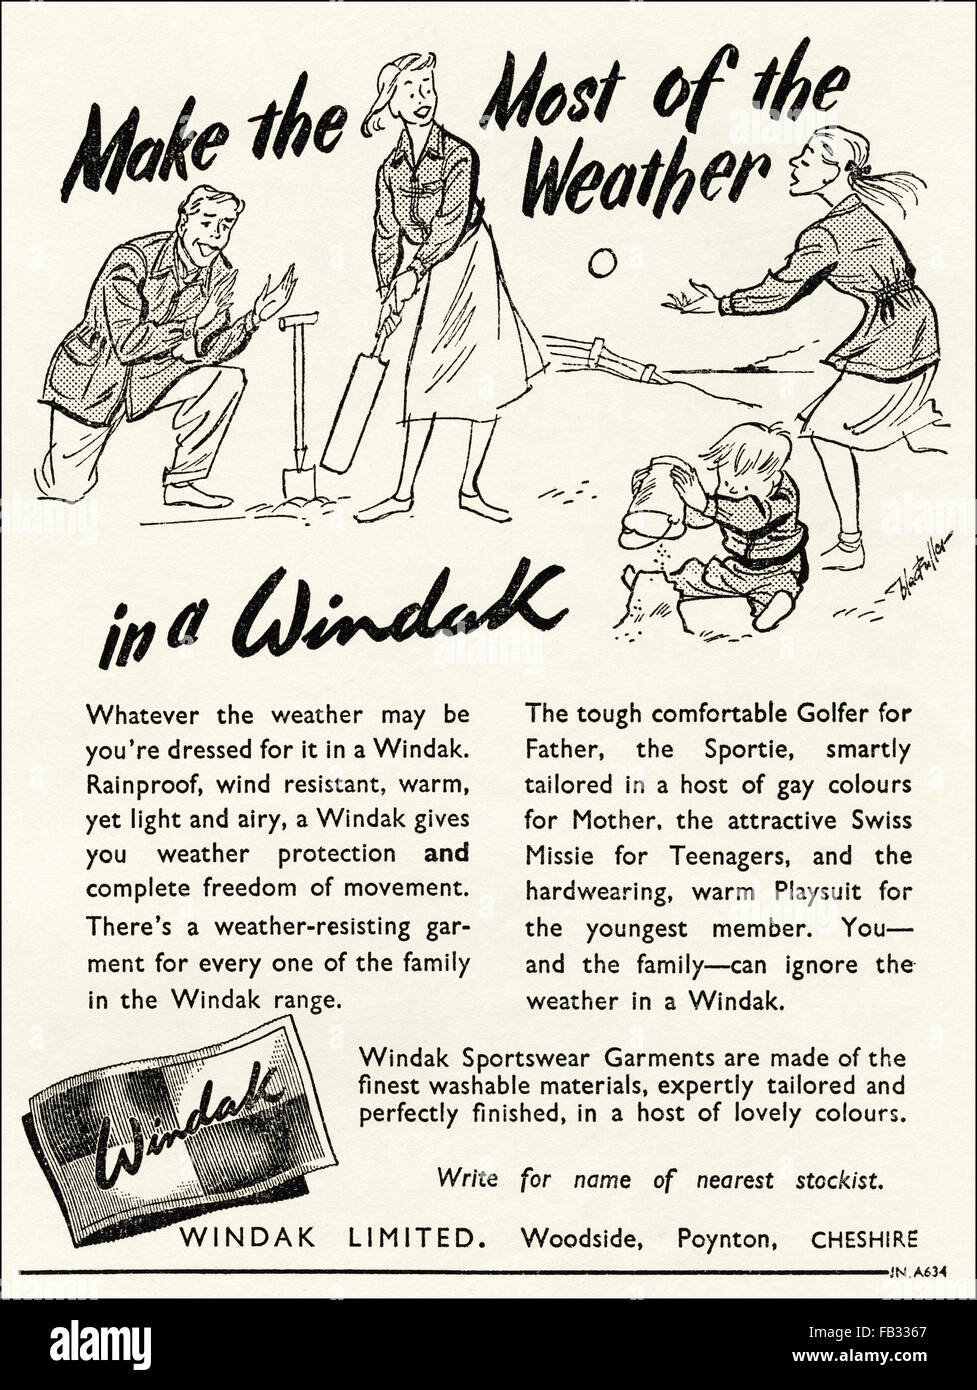 Original vintage advert from 1950s. Advertisement from 1953 advertising Windak rainproof clothing for the whole family. Stock Photo